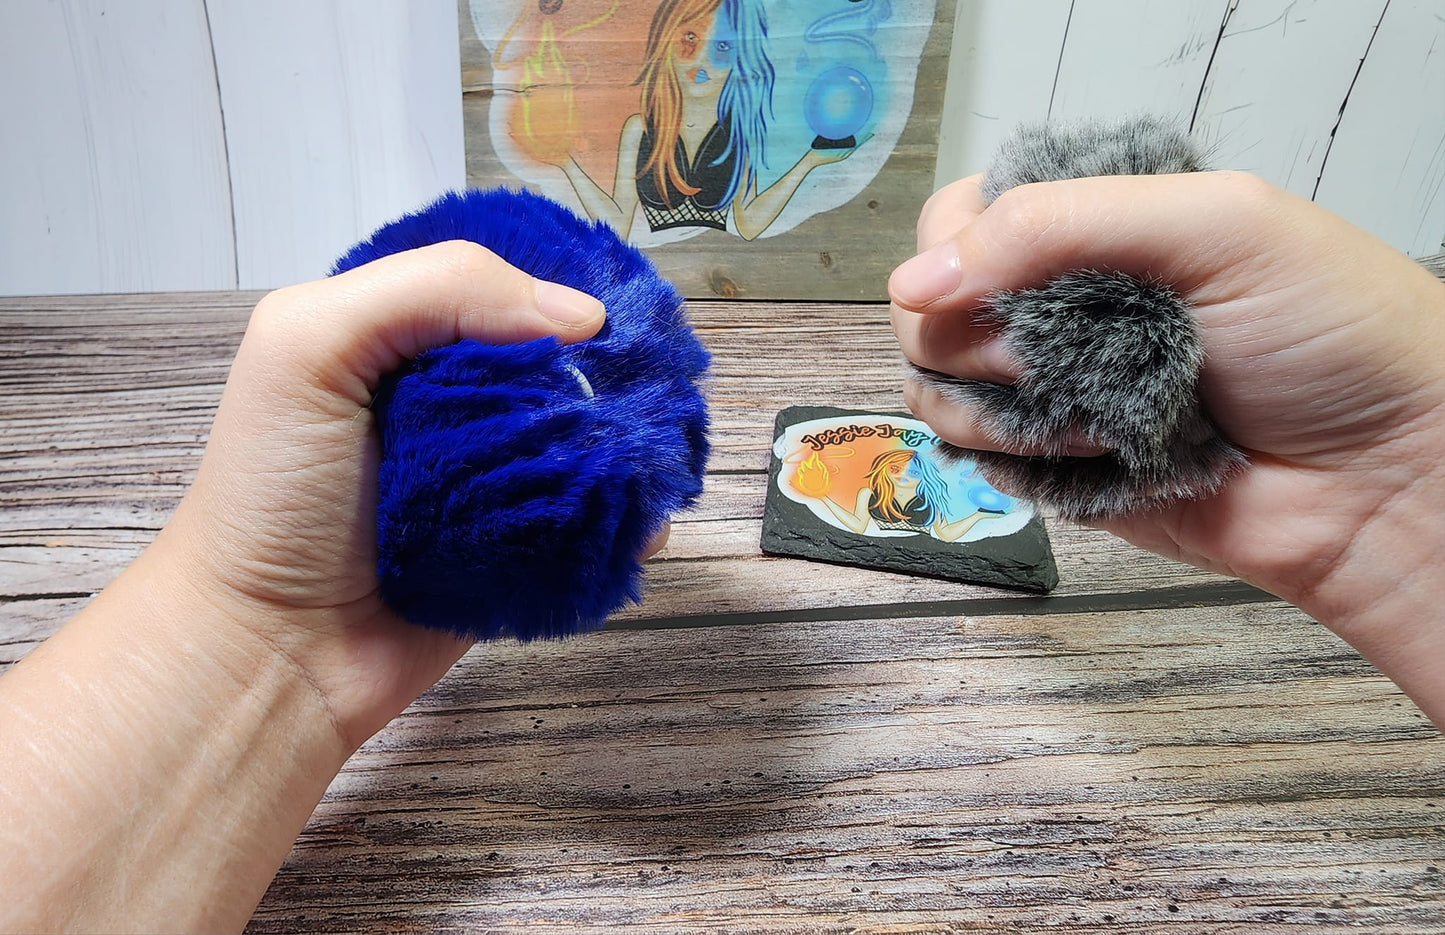 Large 10 cm Pompom Keychain | Or just the Pompom | Faux Rabbit Fur | Add on